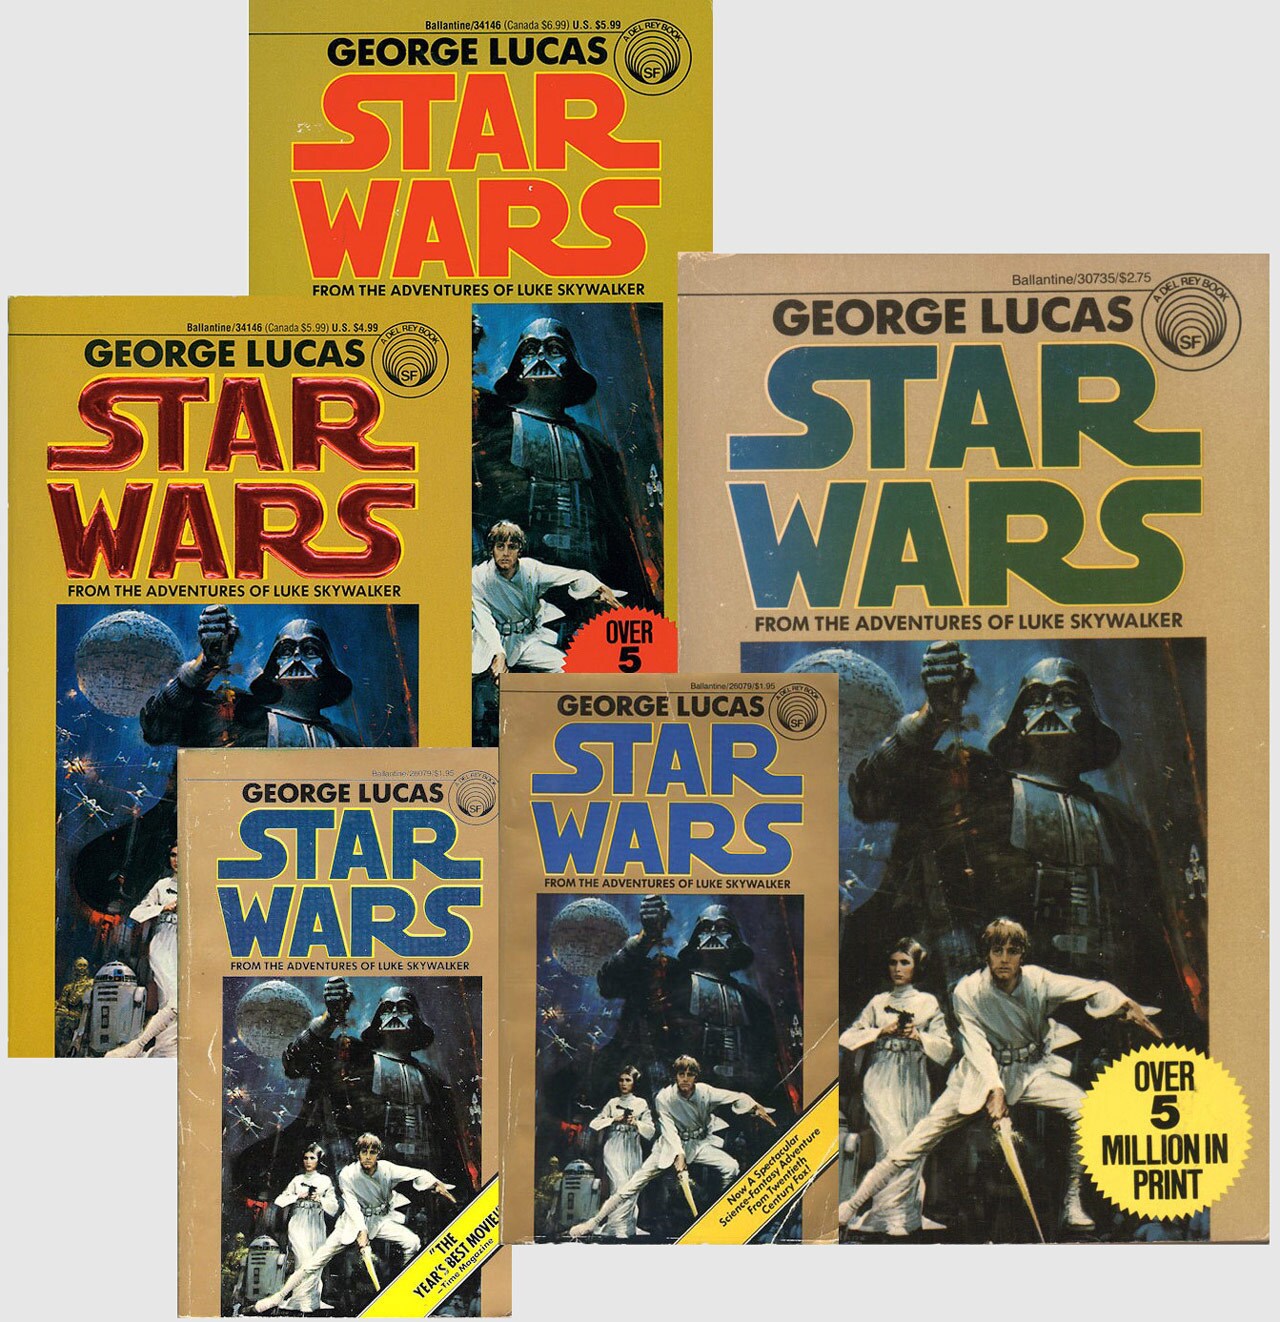 Multiple editions of the book Star Wars: From the Adventures of Luke Skywalker, by George Lucas.